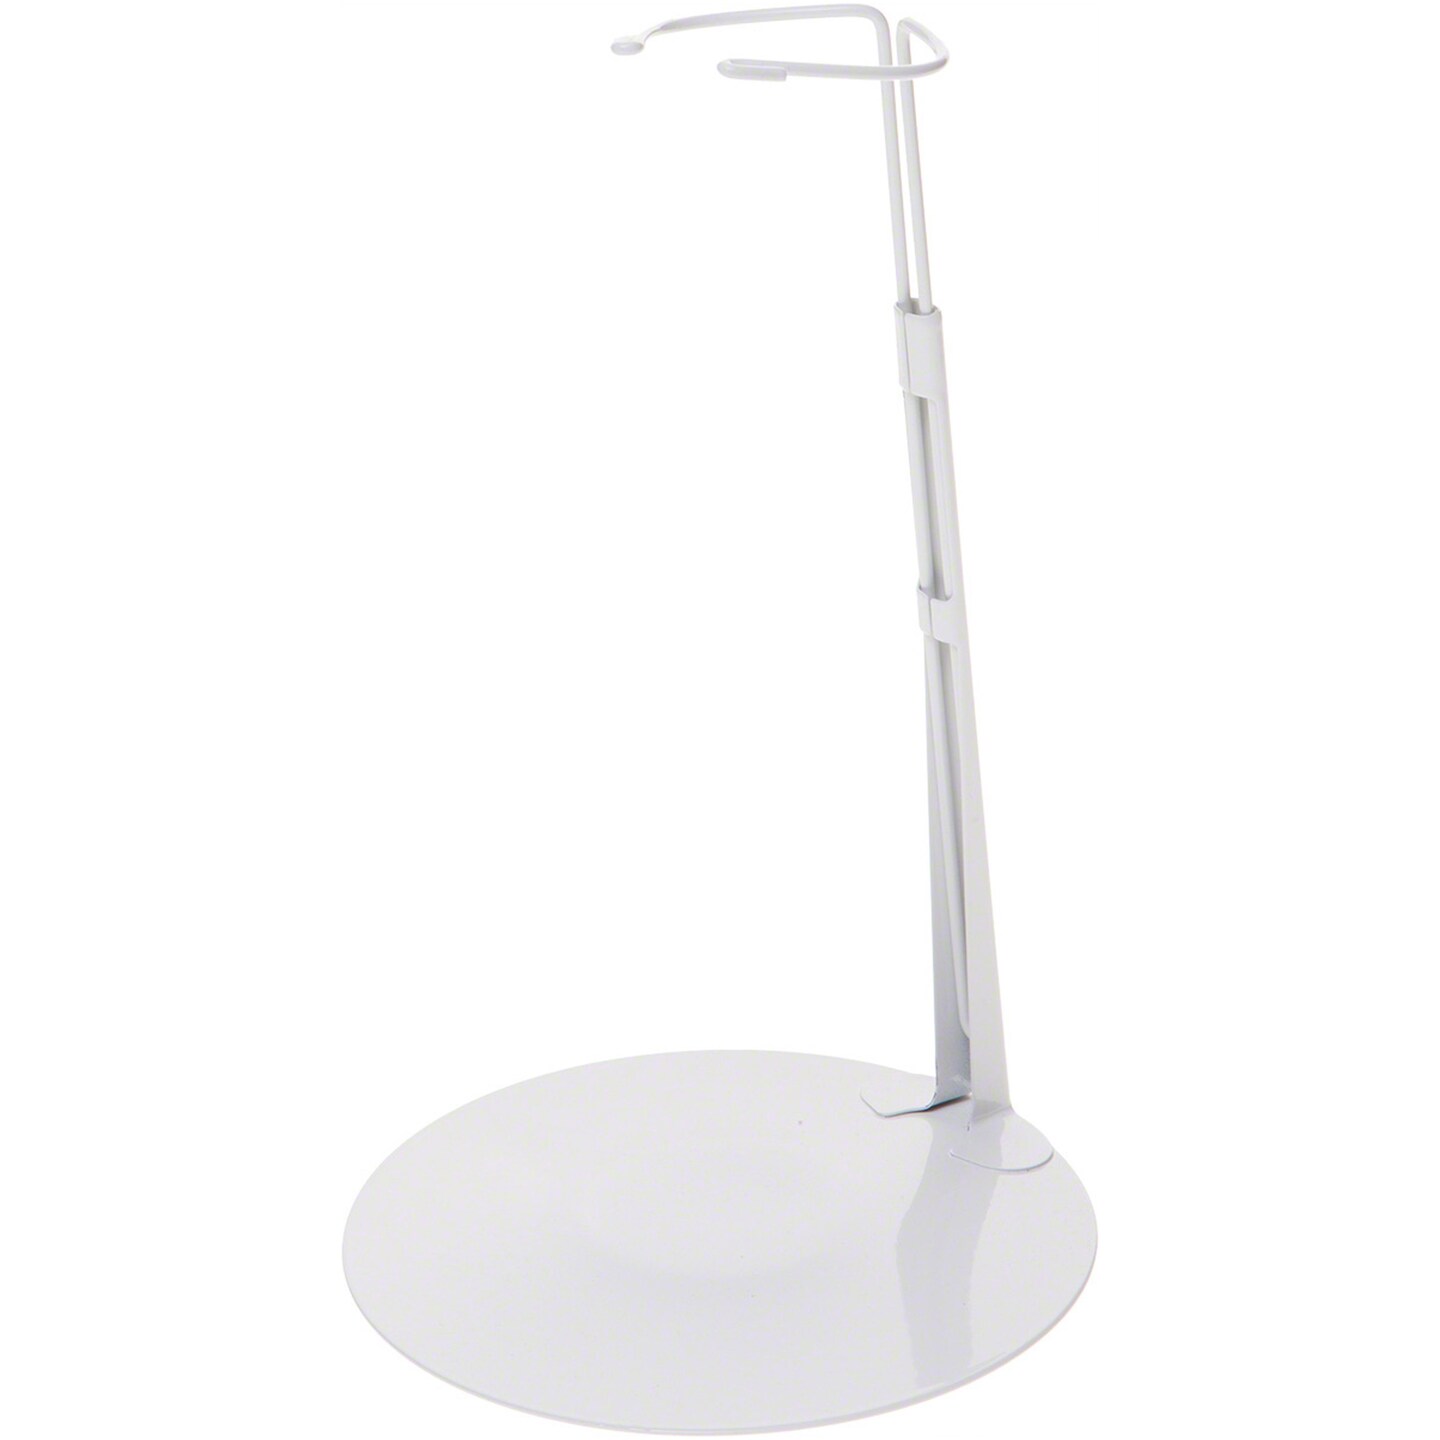 Kaiser 3201 White Adjustable Doll Stand, fits 20 to 30 inch Dolls, waist width adjusts from 2.25 to 2.75 inches